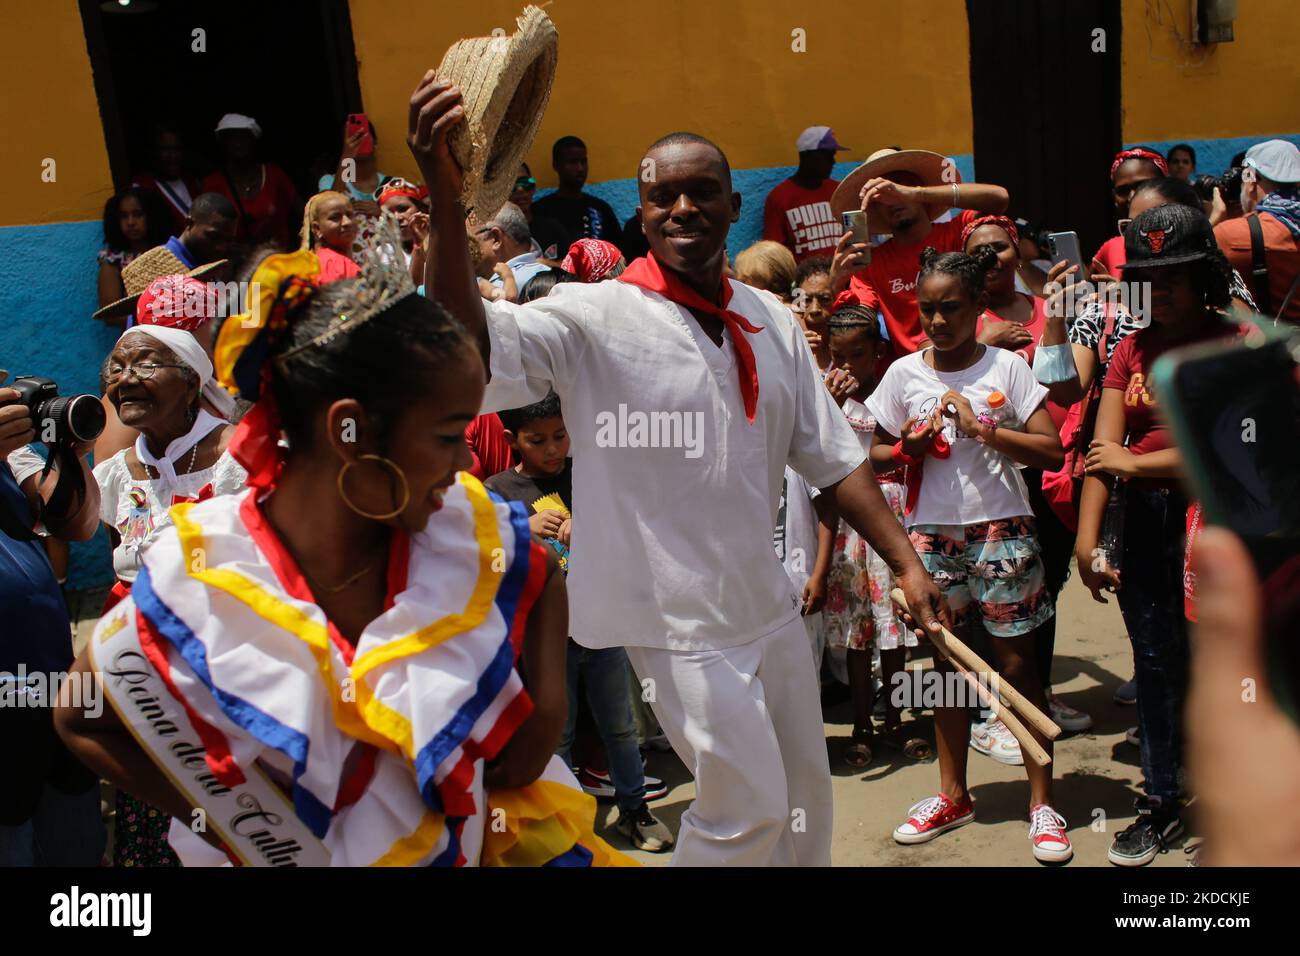 A man dances with a woman during the festival of St. John the Baptist in Curiepe, Miranda, Venezuela on June 24, 2022. The United Nations Educational, Scientific and Cultural Organization (Unesco) in 2021 declared the festivity around the devotion and worship of St. John the Baptist intangible cultural heritage of humanity. (Photo by Javier Campos/NurPhoto) Stock Photo